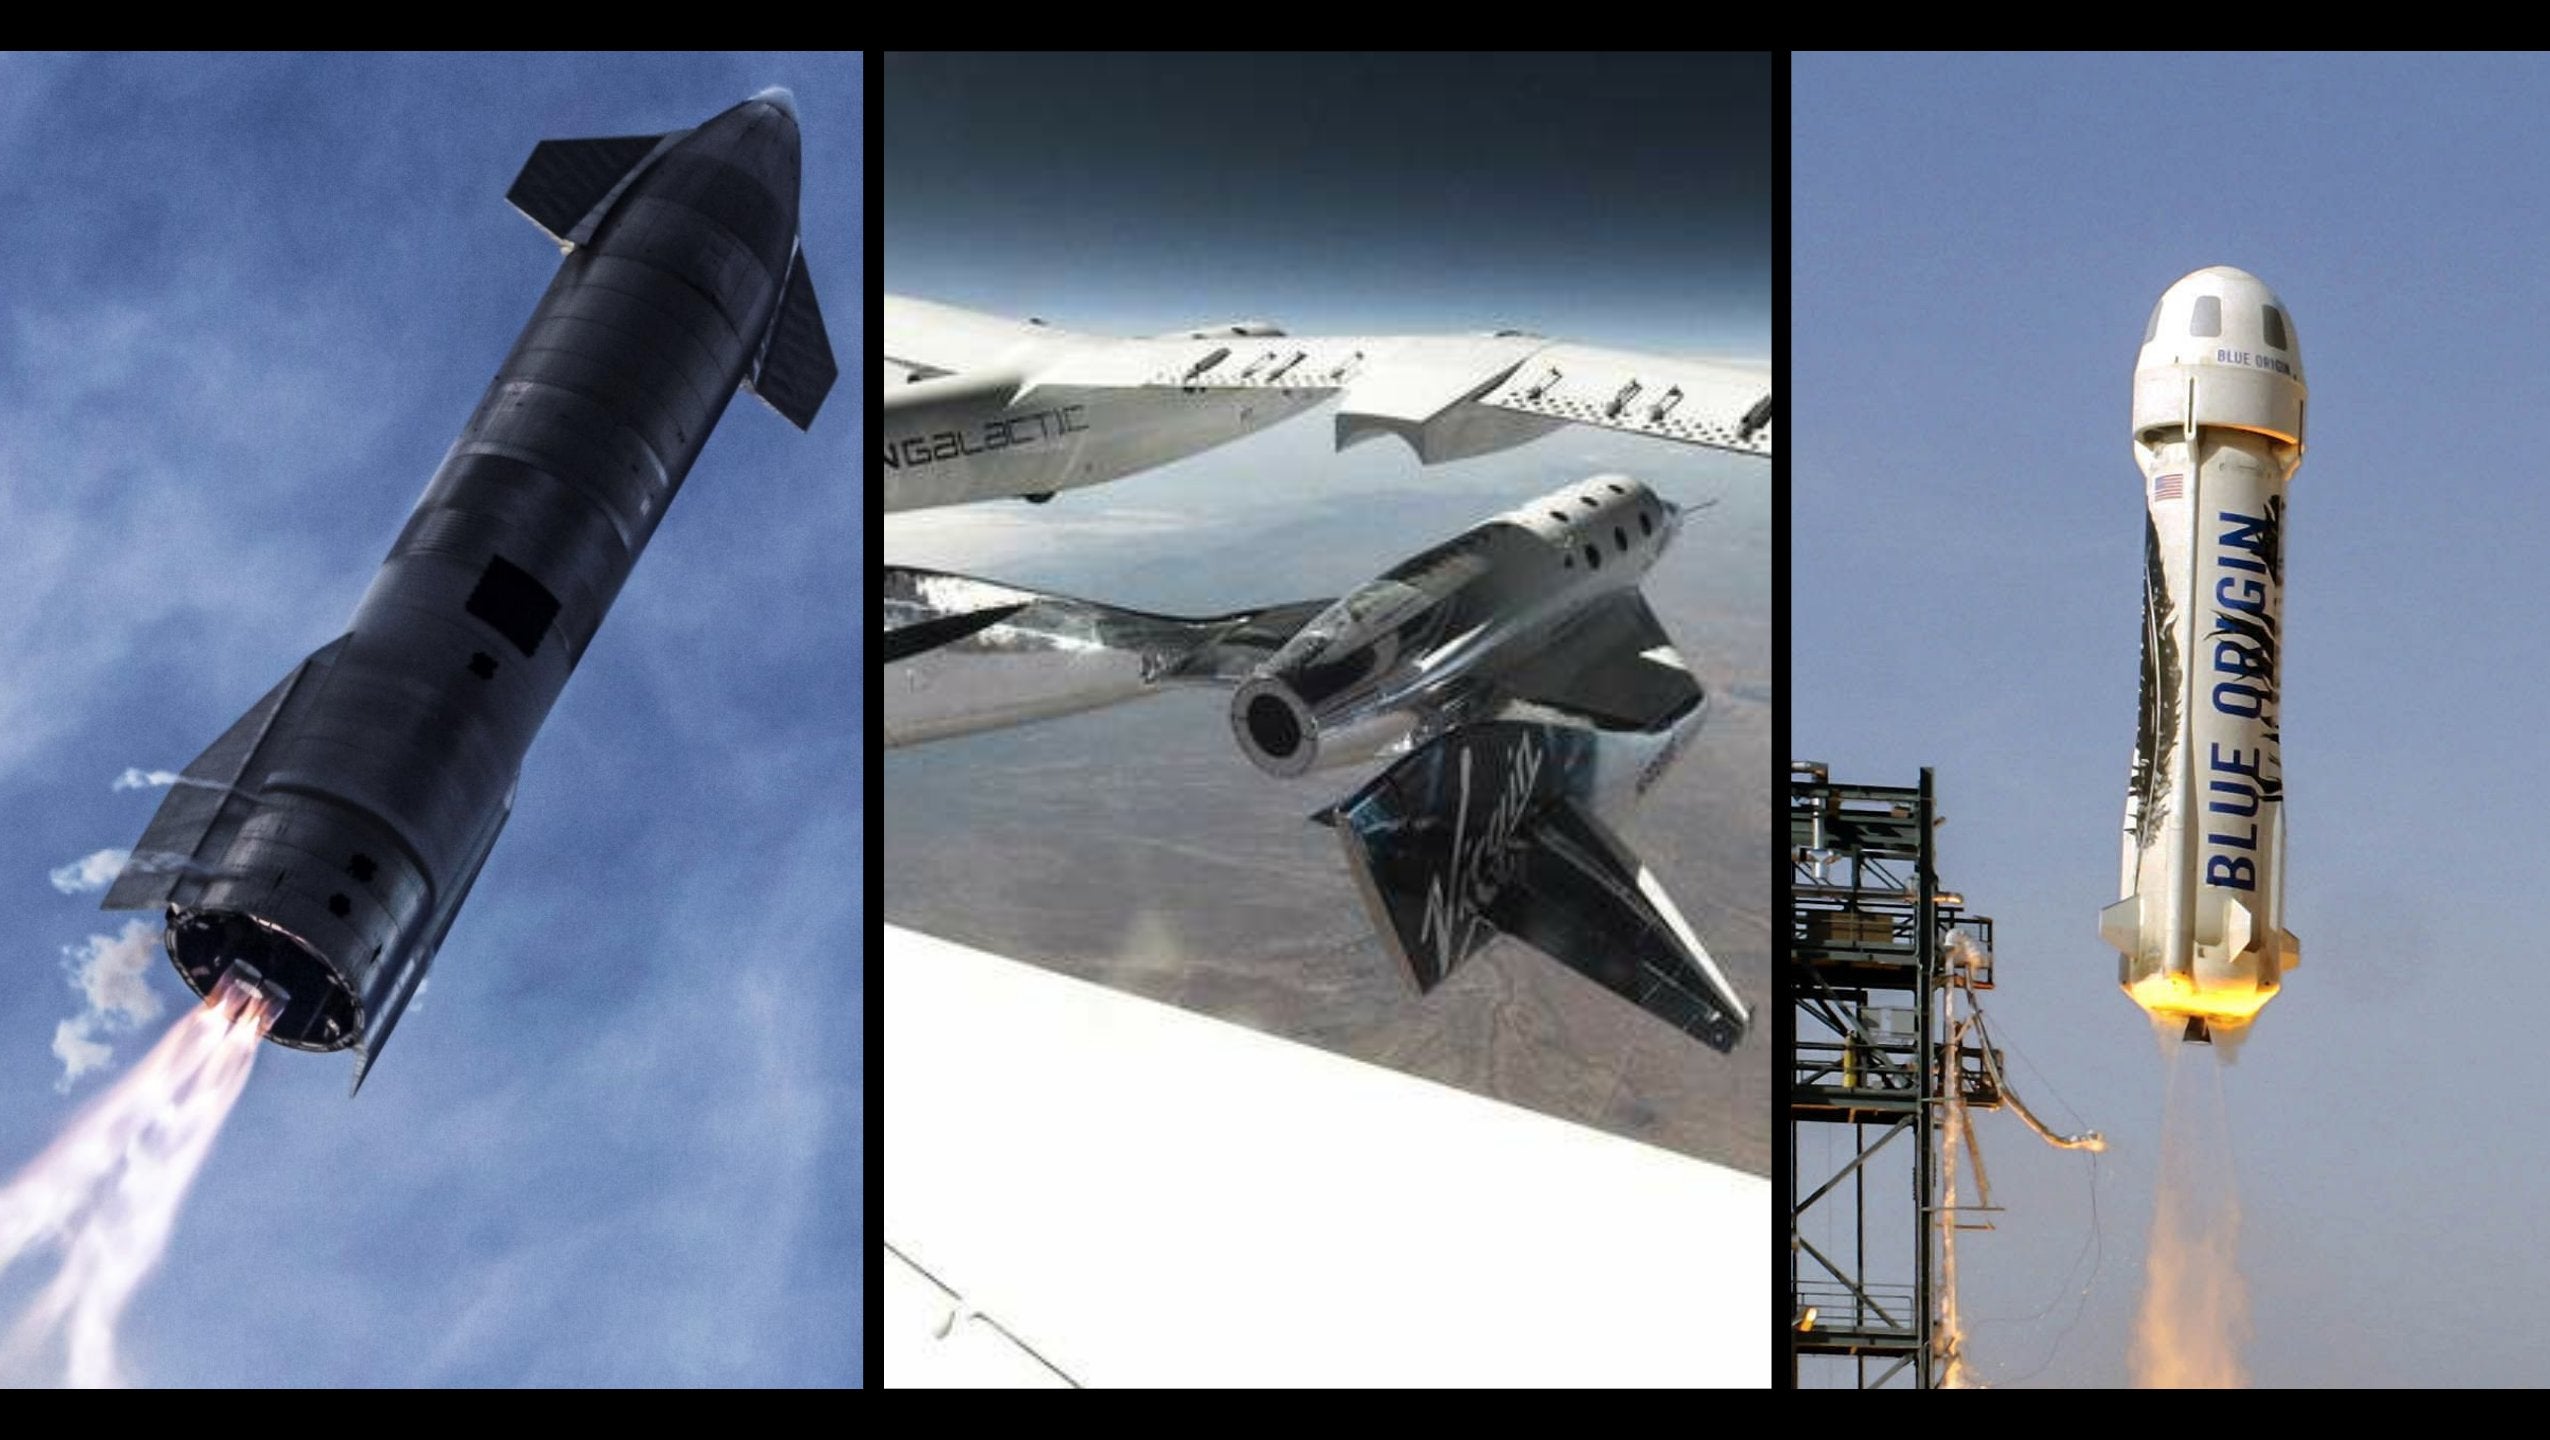 Federal Aviation Administration Opens A Space Safety Office In Texas To Oversee SpaceX, Blue Origin, & Virgin Galactic